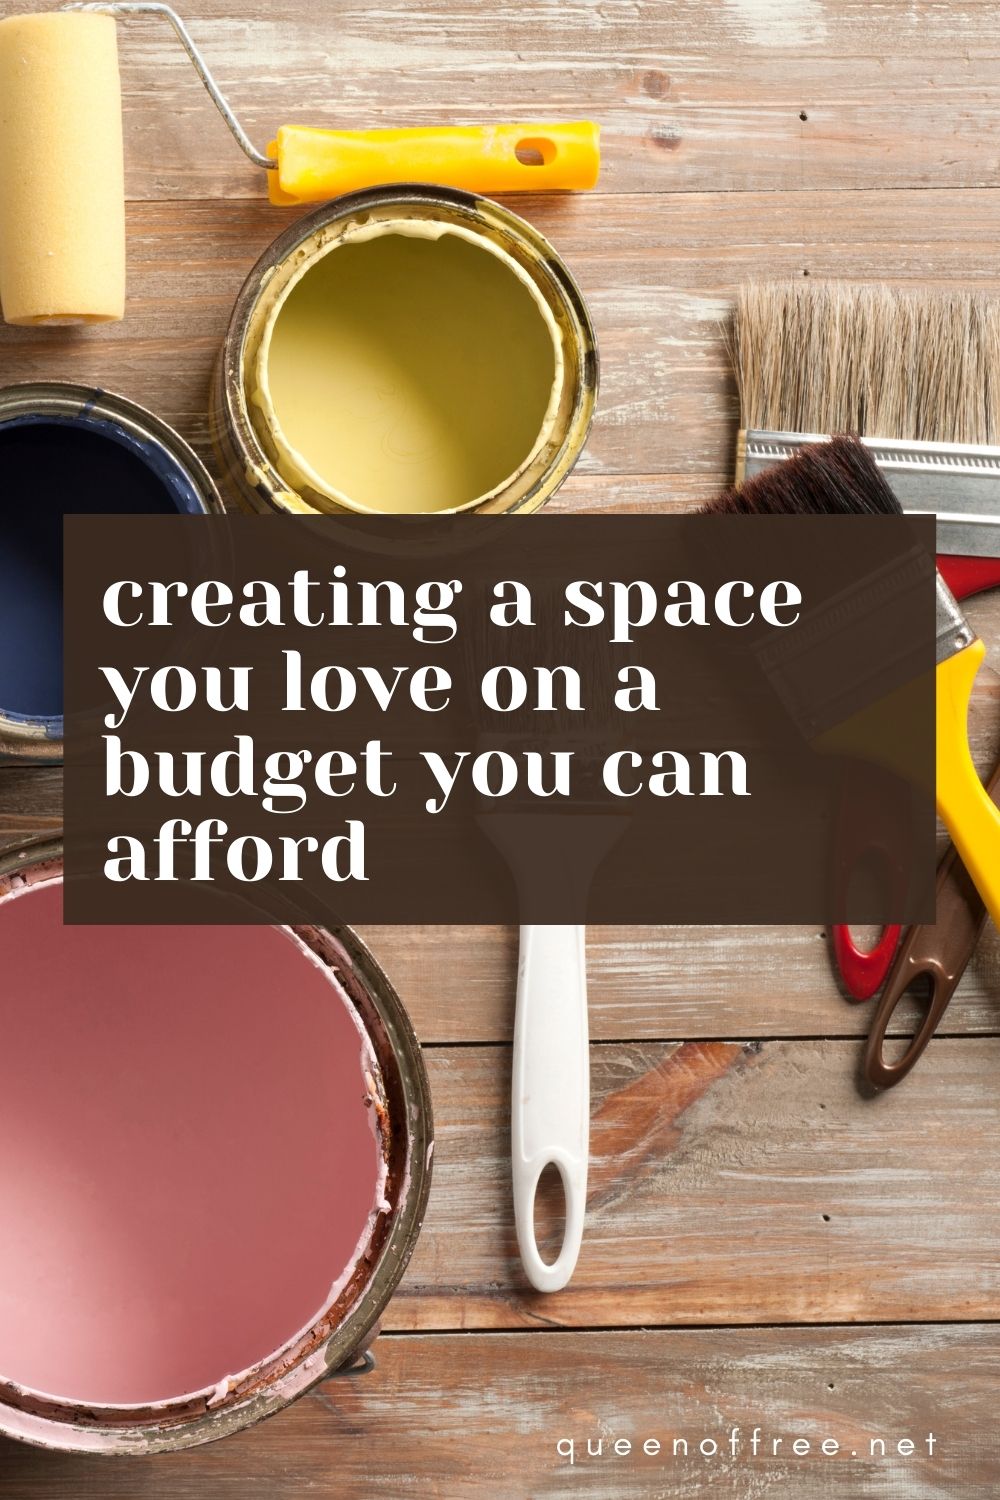 You can create a space you love on a budget you can actually afford with these simple home improvement money saving ideas!